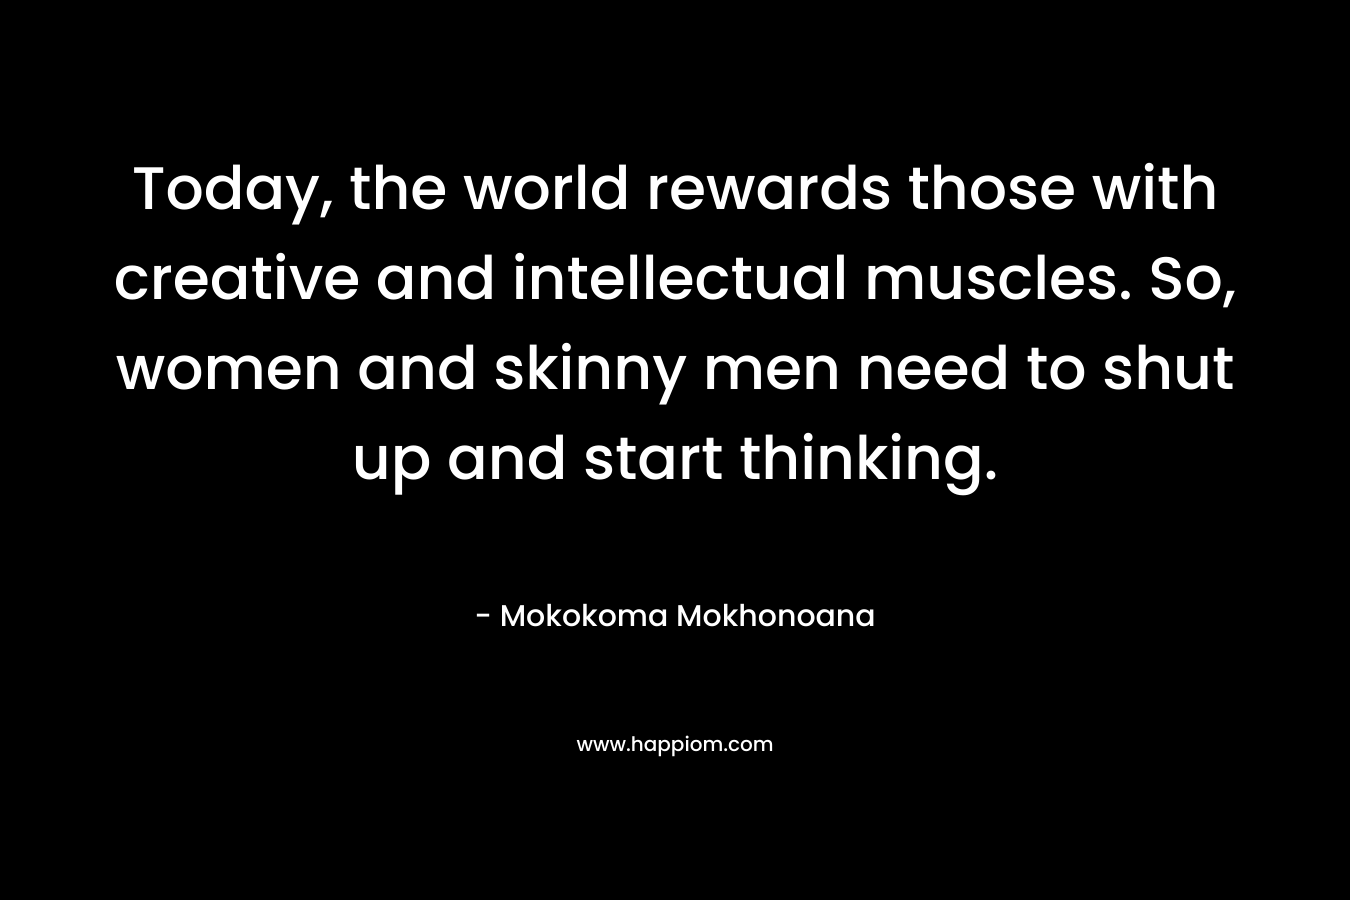 Today, the world rewards those with creative and intellectual muscles. So, women and skinny men need to shut up and start thinking.